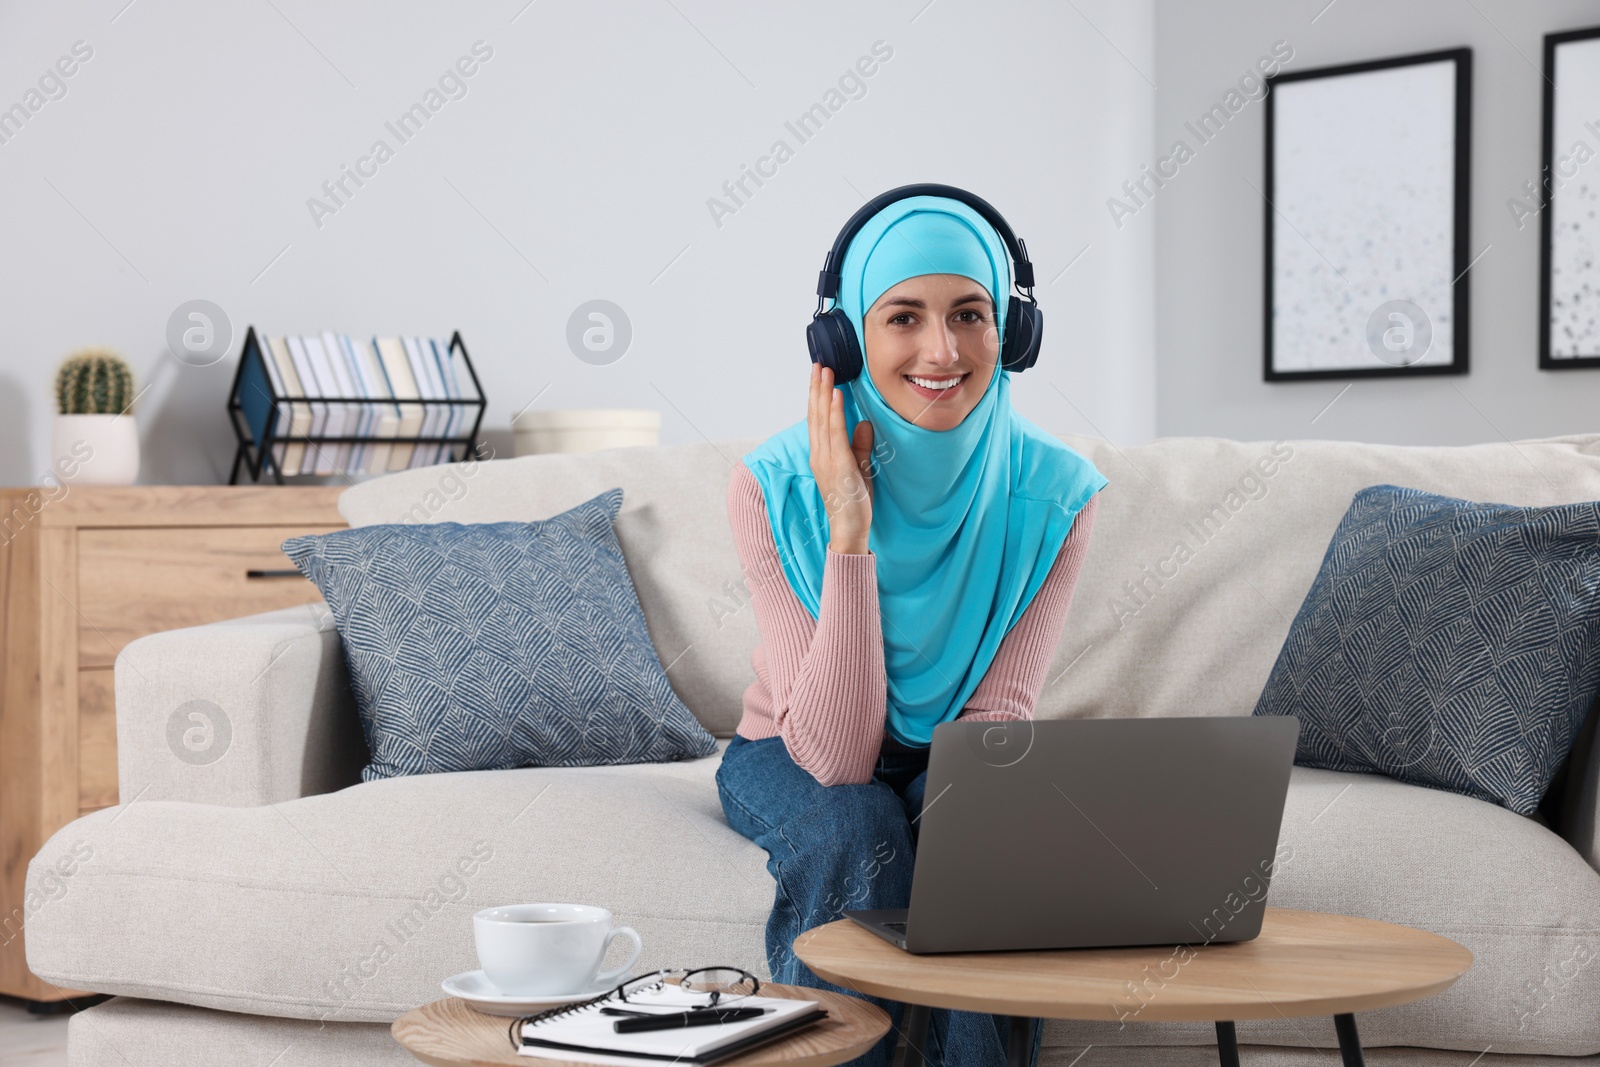 Photo of Muslim woman in headphones using laptop at wooden table in room. Space for text